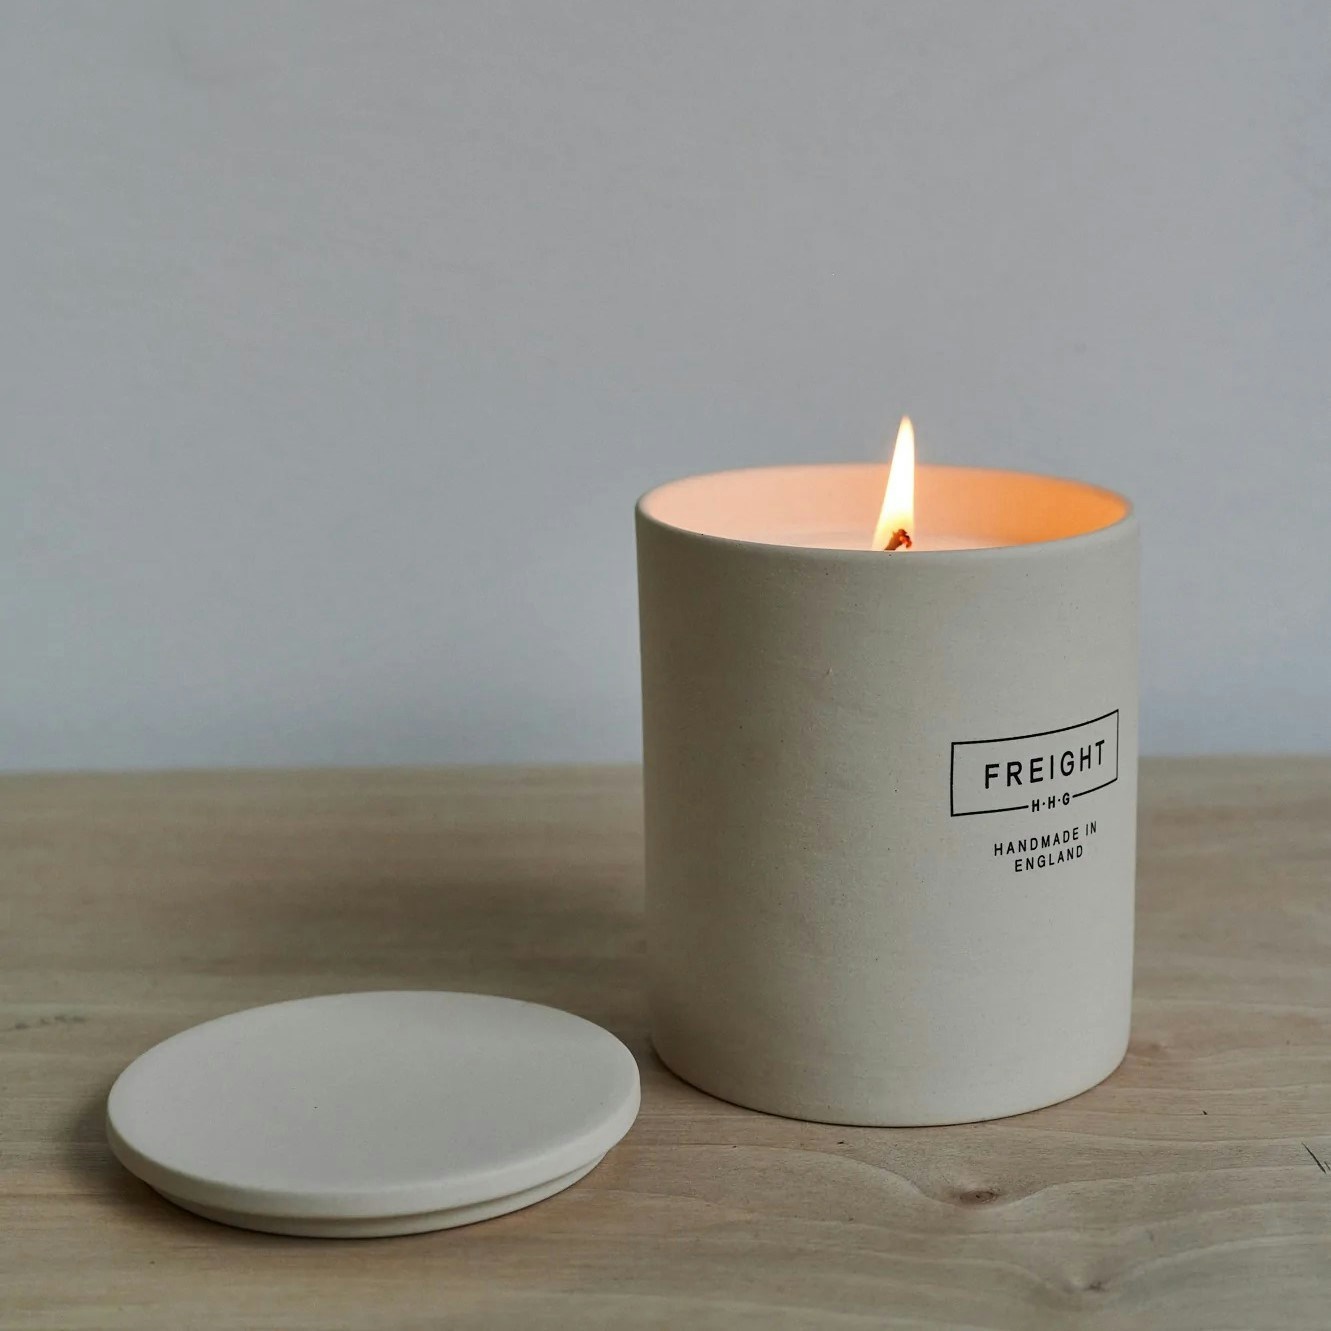 Freight Vetiver And Oakmoss Candle, £38